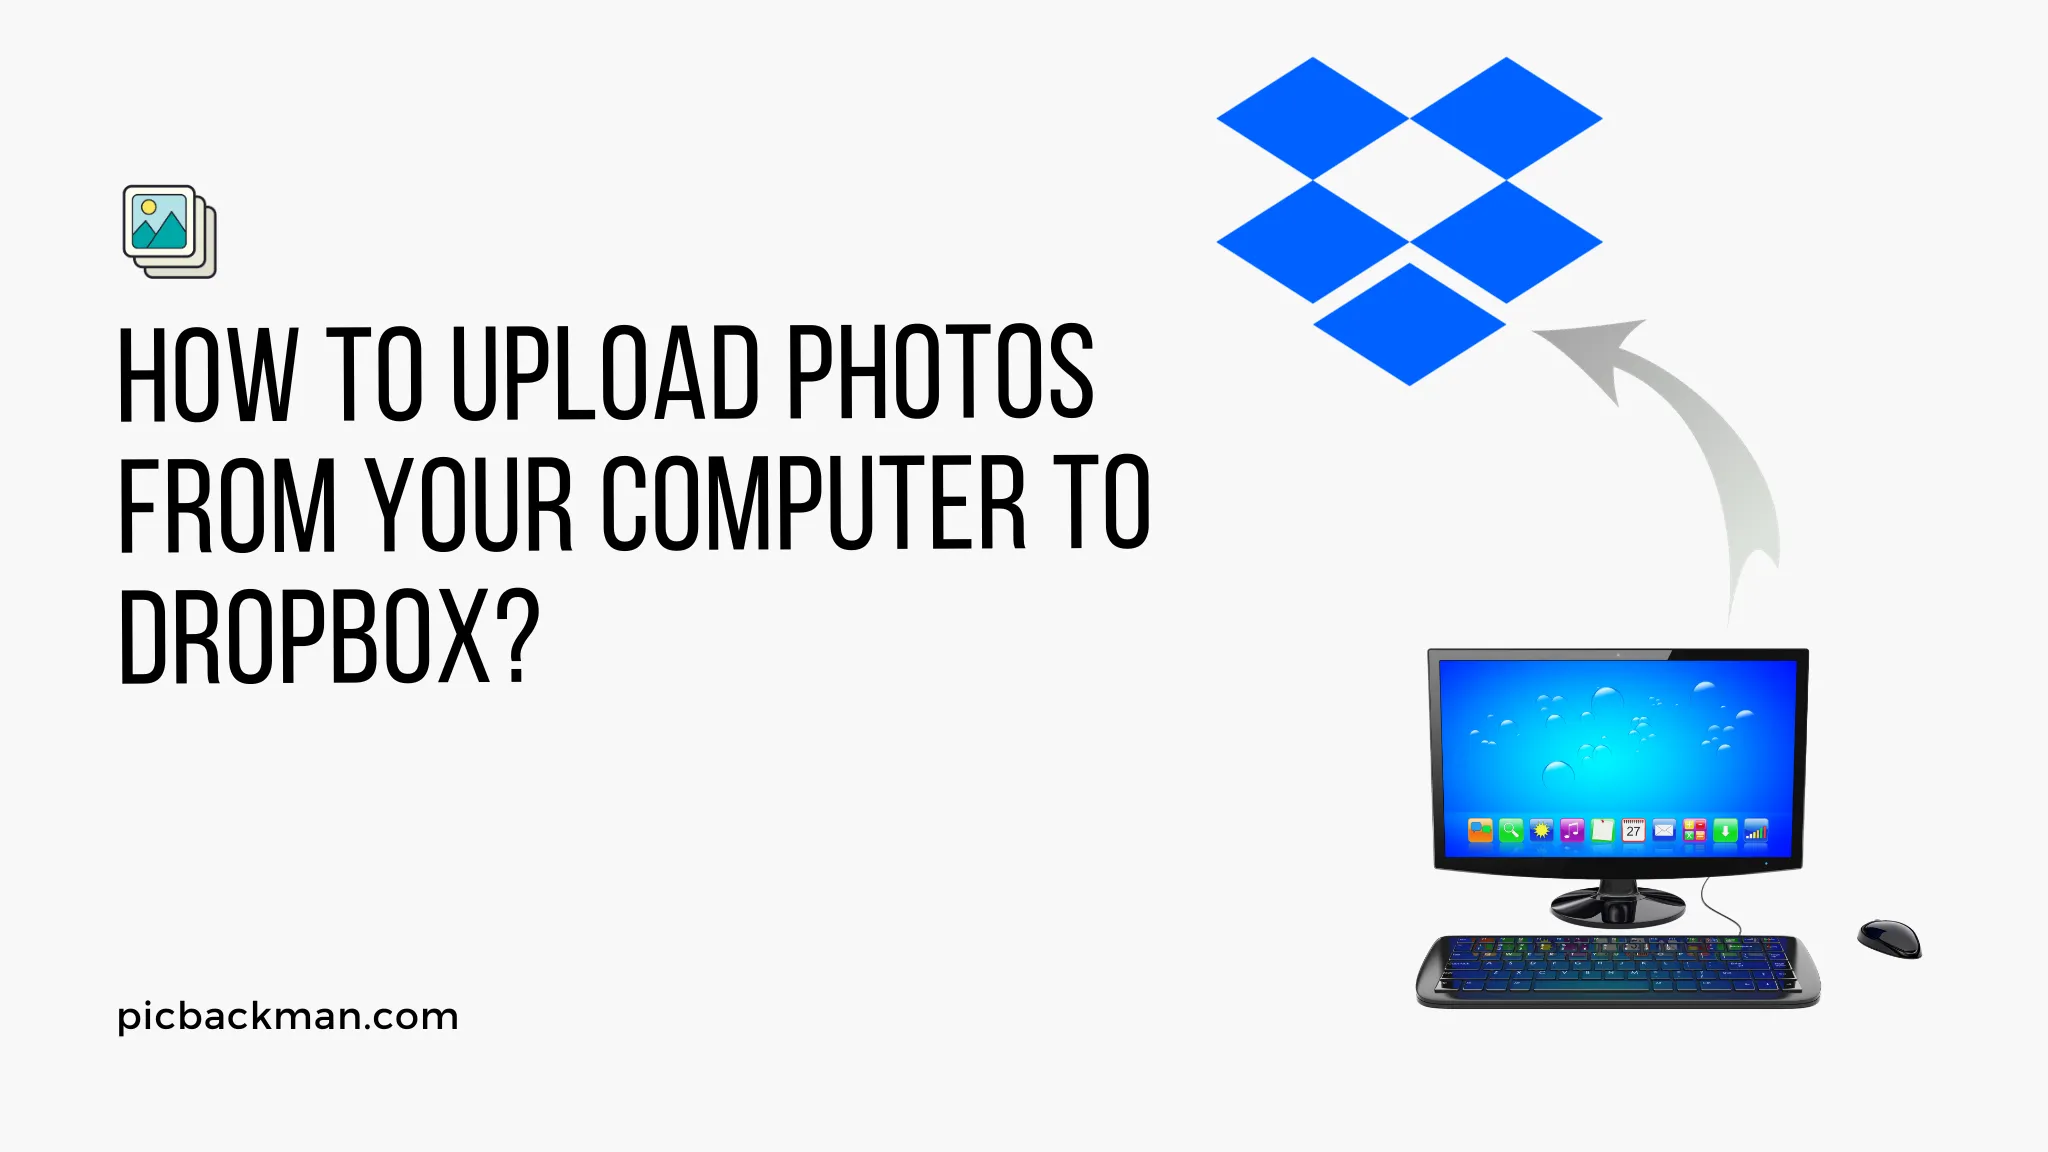 How to upload photos from computer to Dropbox